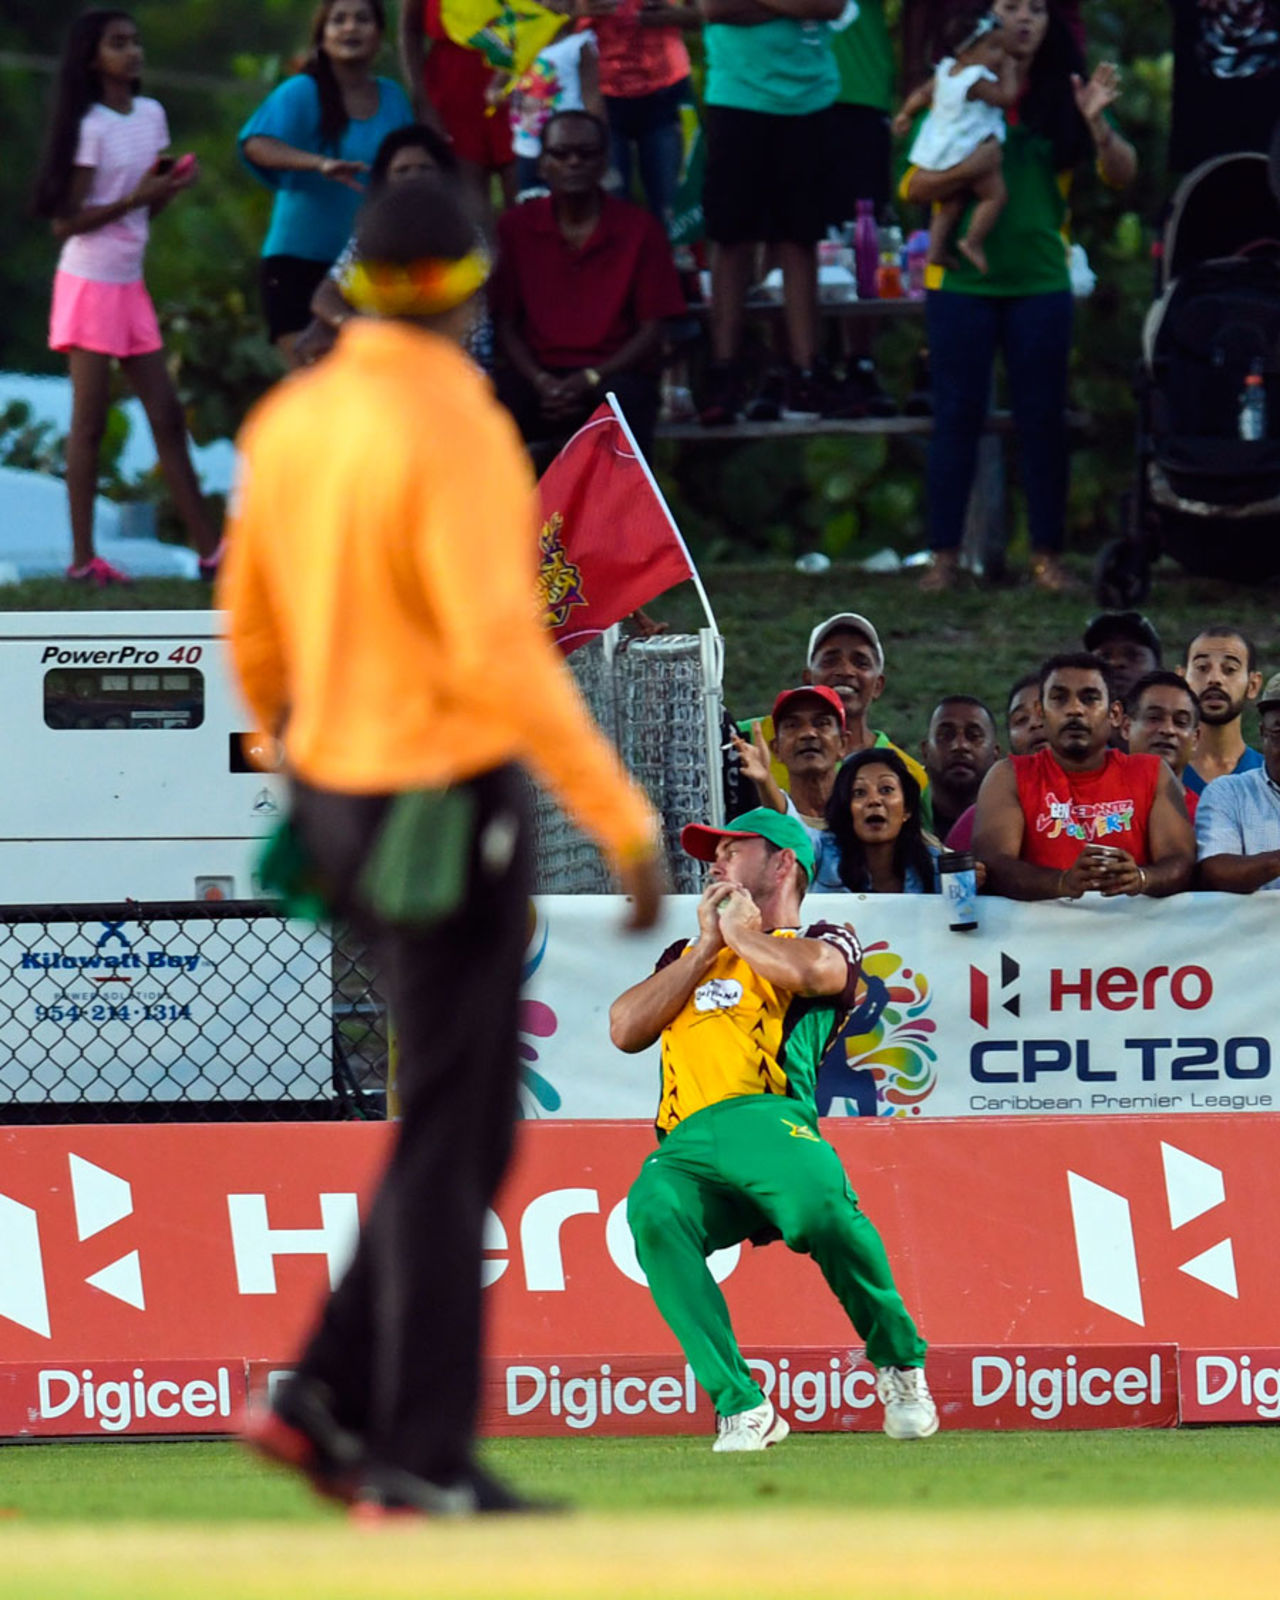 The crowd watches intently as Chris Lynn holds on to a catch, Barbados Tridents v Guyana Amazon Warriors, CPL 2016, Lauderhill, July 28, 2016